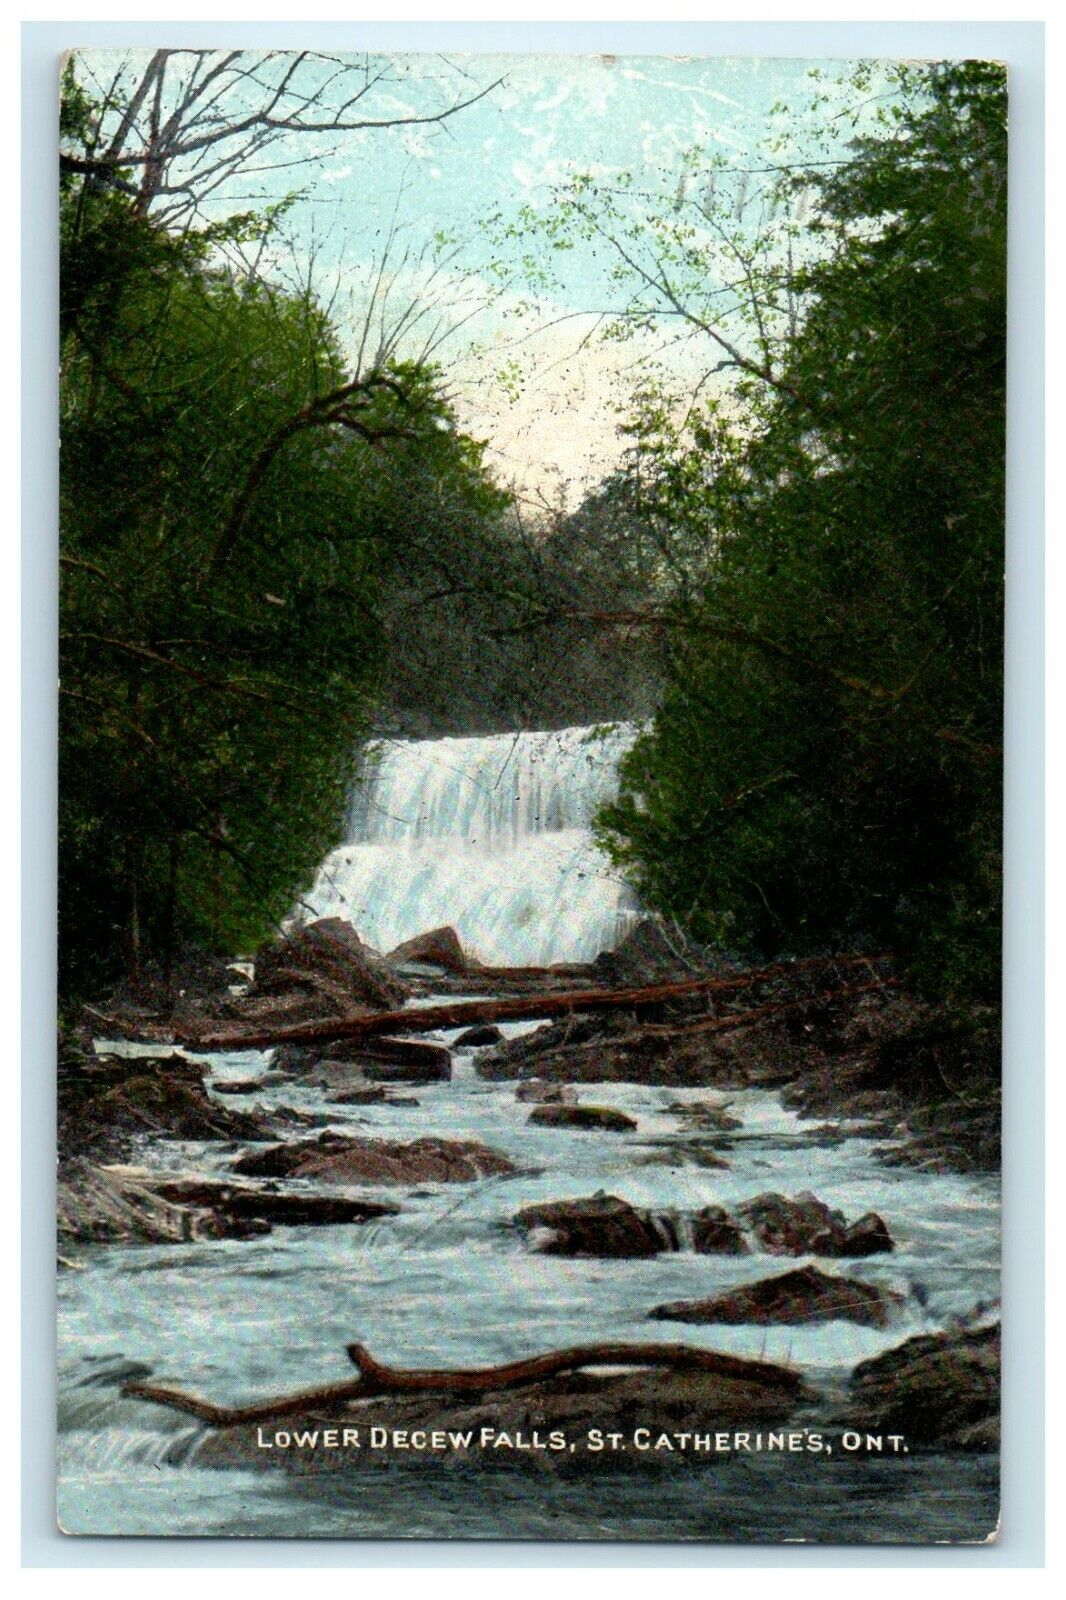 1910 Lower Decew Falls St. Catherine's Ontario Canada Posted Antique Postcard